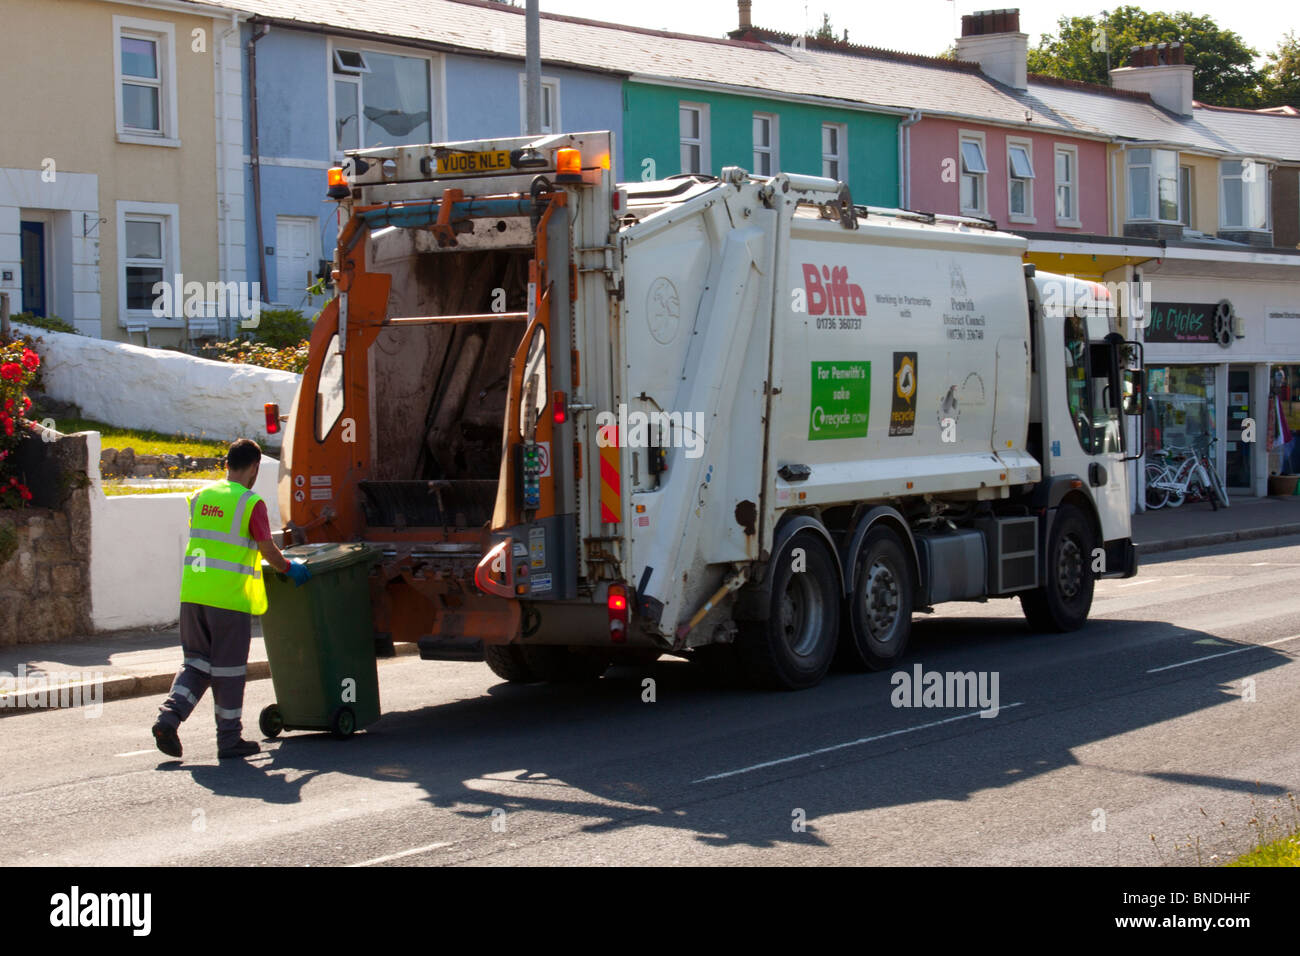 refuge collection in Hayle, Cornwall, England. Dustman collecting rubbish and recycling in dust cart Stock Photo